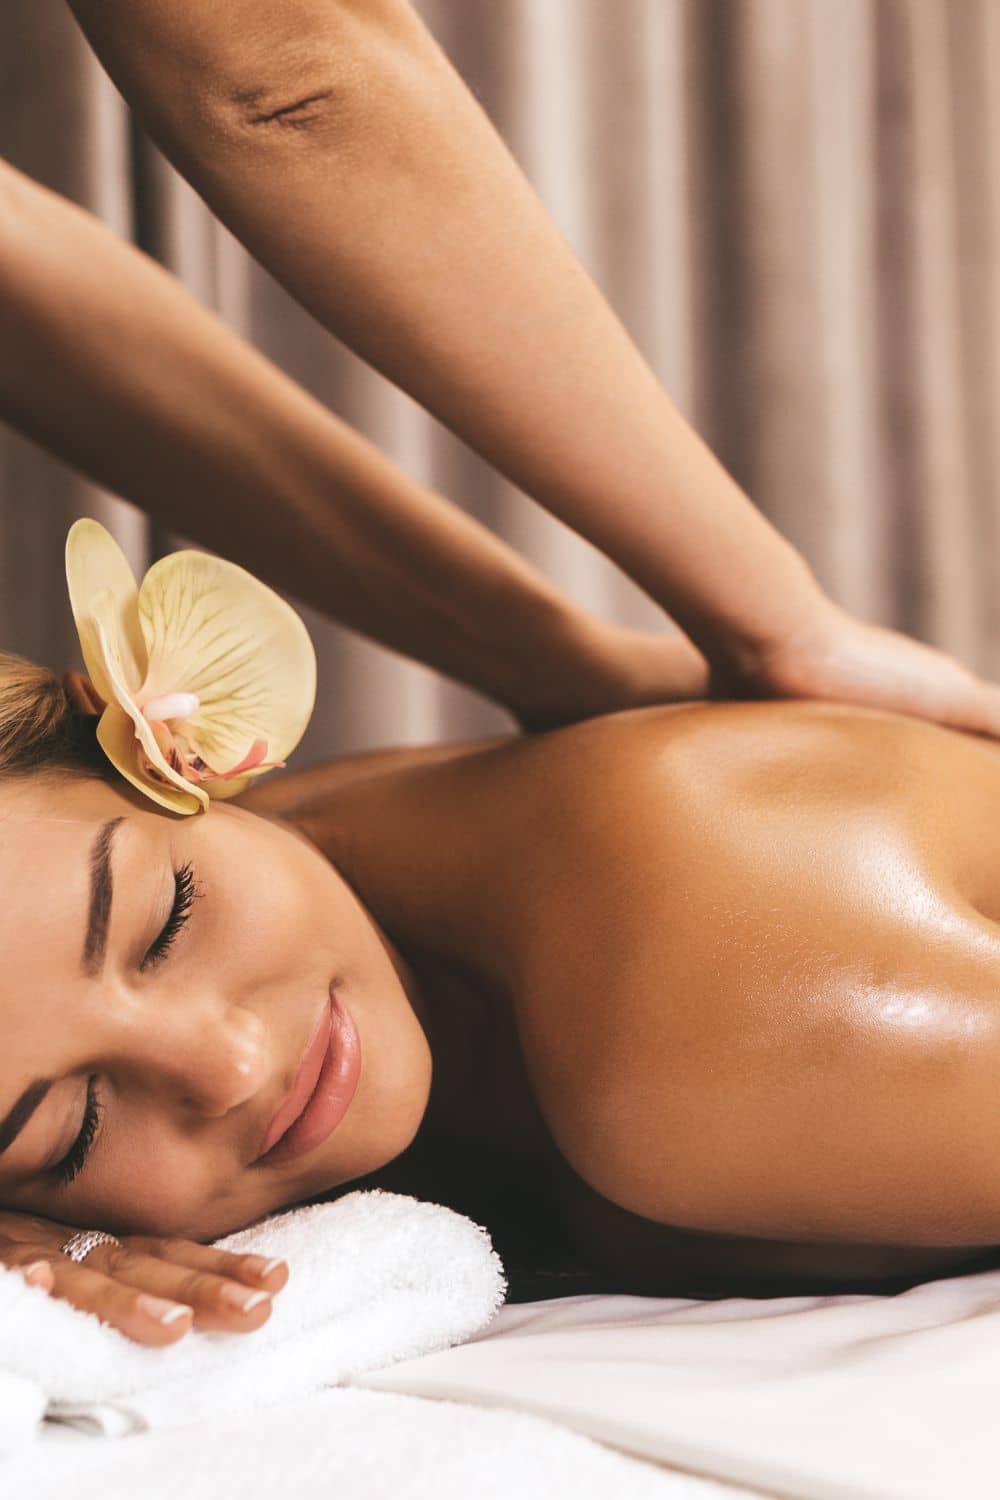 5 Perks of Massage Therapy for Women